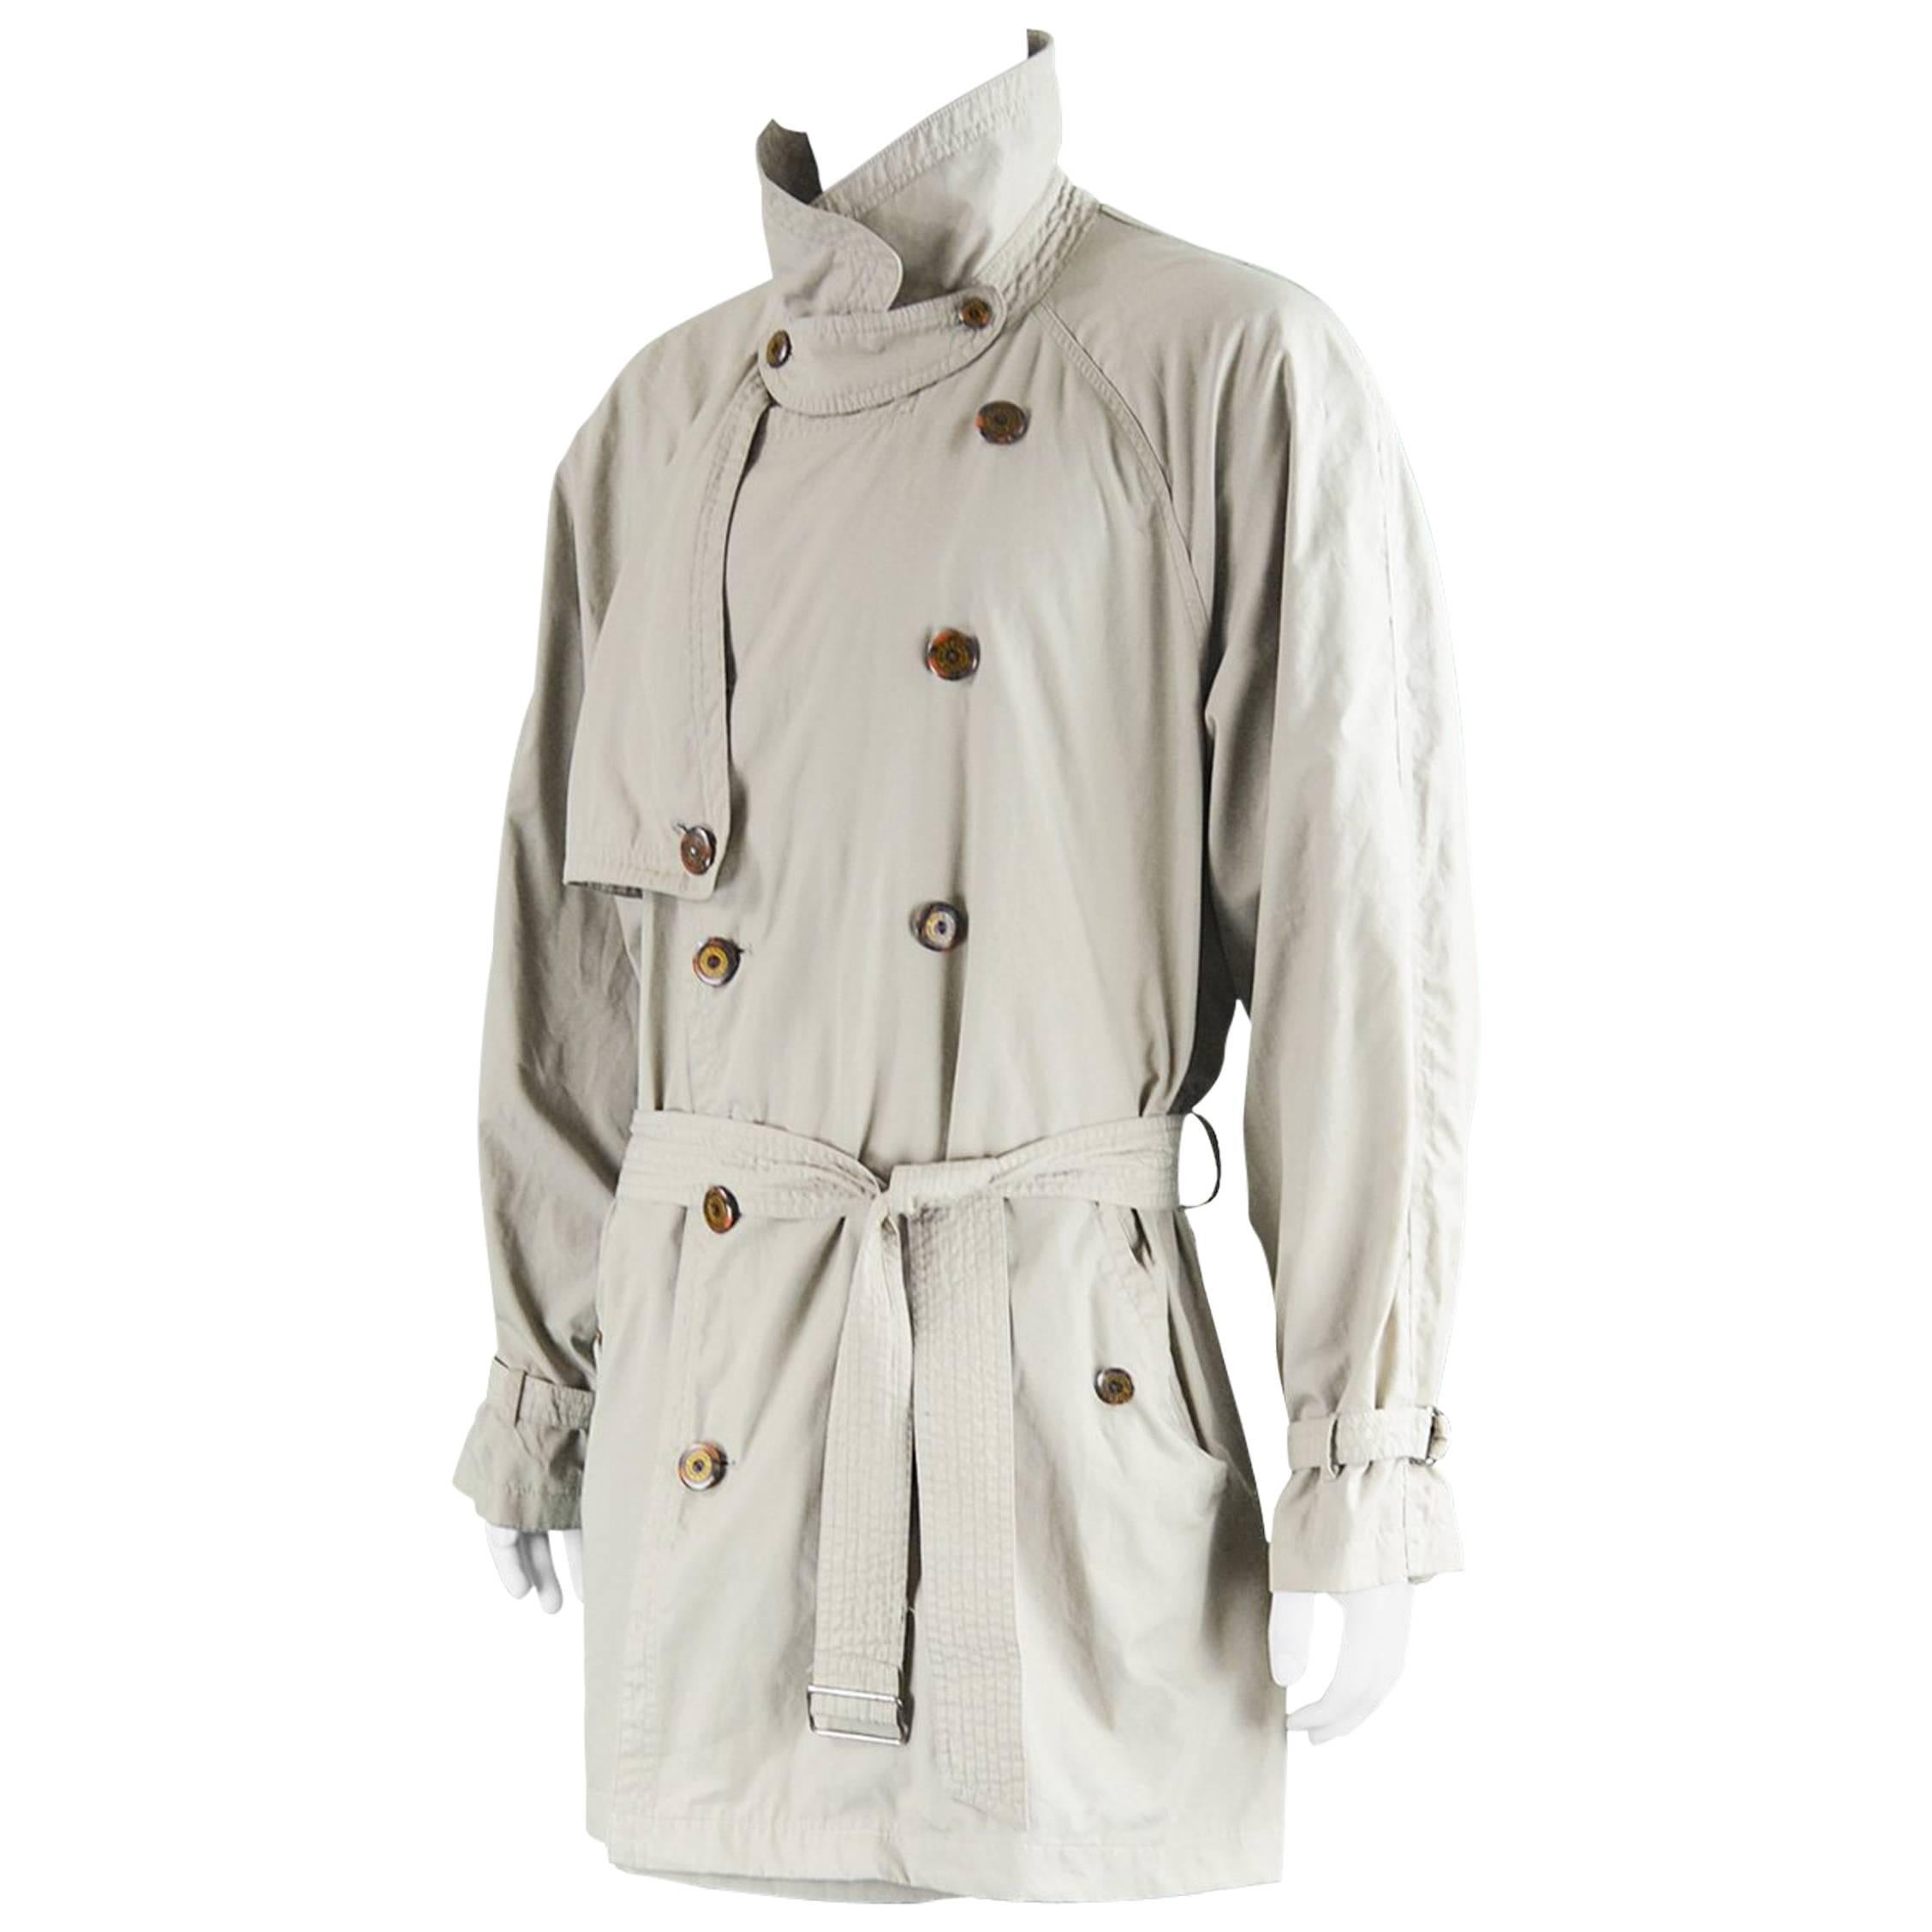 Yves Saint Laurent Men's Lightweight Cotton Double Breasted Trenchcoat, 1990s For Sale